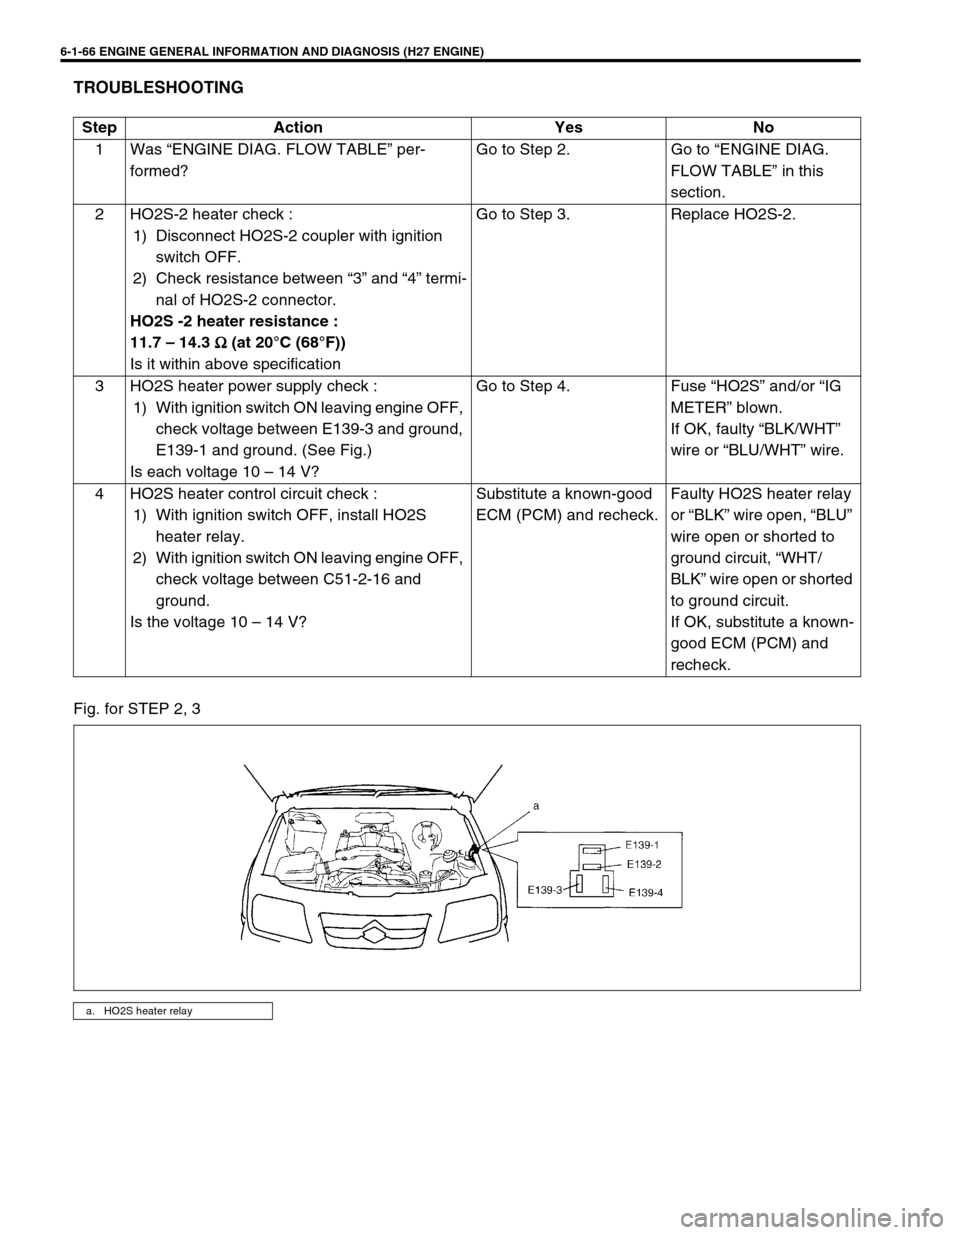 SUZUKI GRAND VITARA 1999 2.G User Guide 6-1-66 ENGINE GENERAL INFORMATION AND DIAGNOSIS (H27 ENGINE)
TROUBLESHOOTING
Fig. for STEP 2, 3Step Action Yes No
1 Was “ENGINE DIAG. FLOW TABLE” per-
formed?Go to Step 2. Go to “ENGINE DIAG. 
F